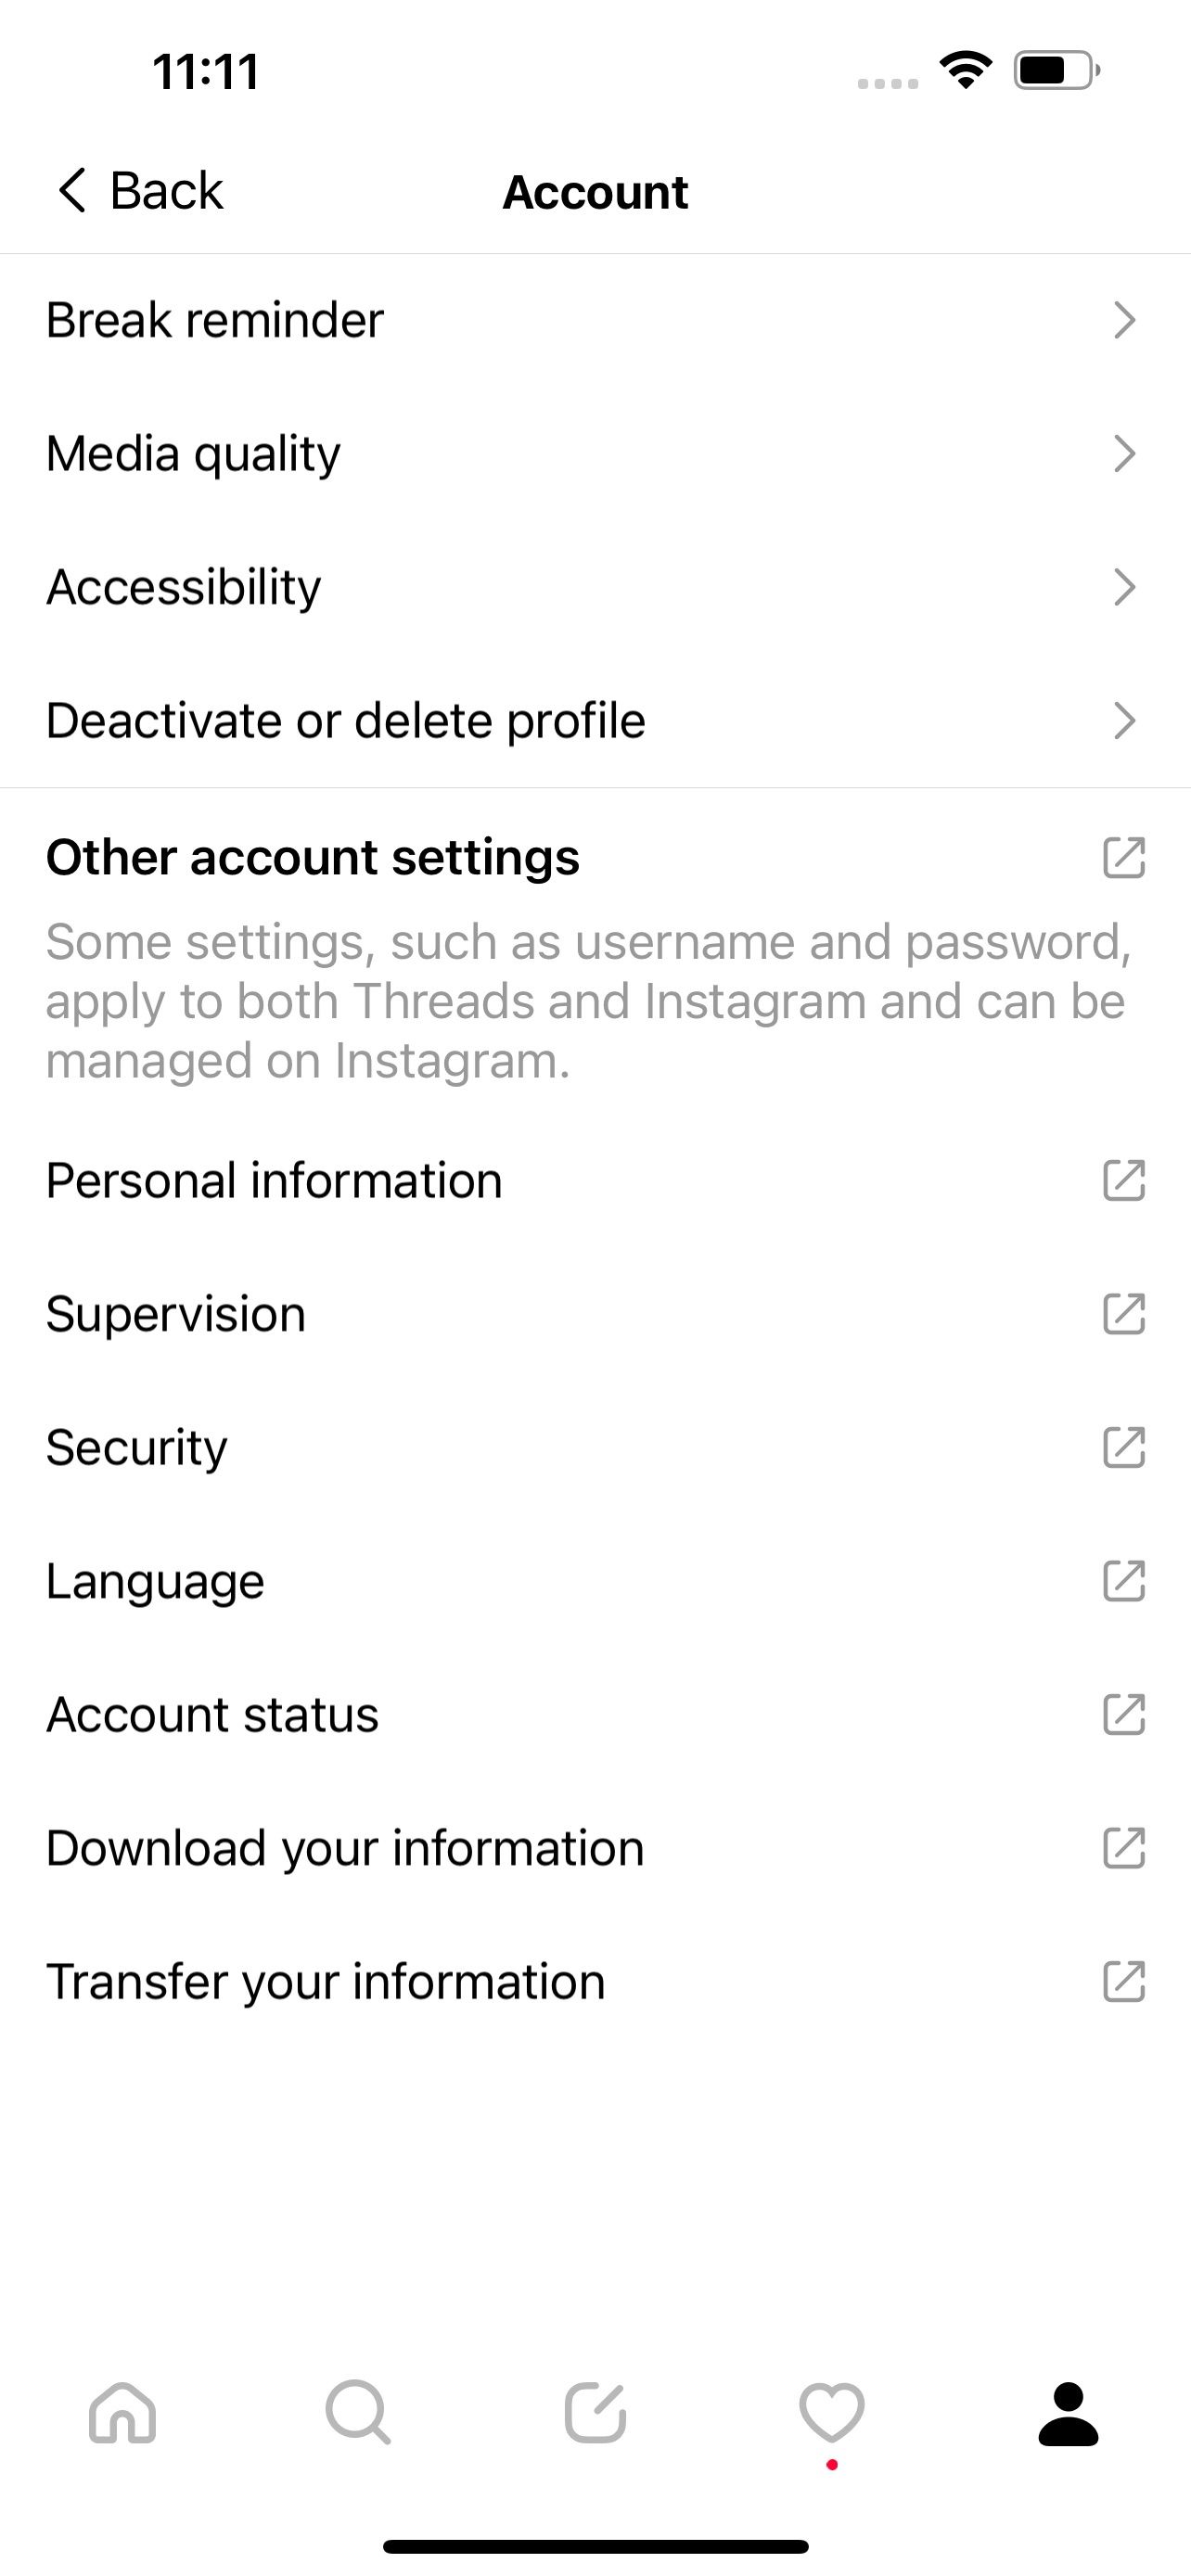 You Can Now Delete Your Threads Account Without Deleting Your Instagram 4487